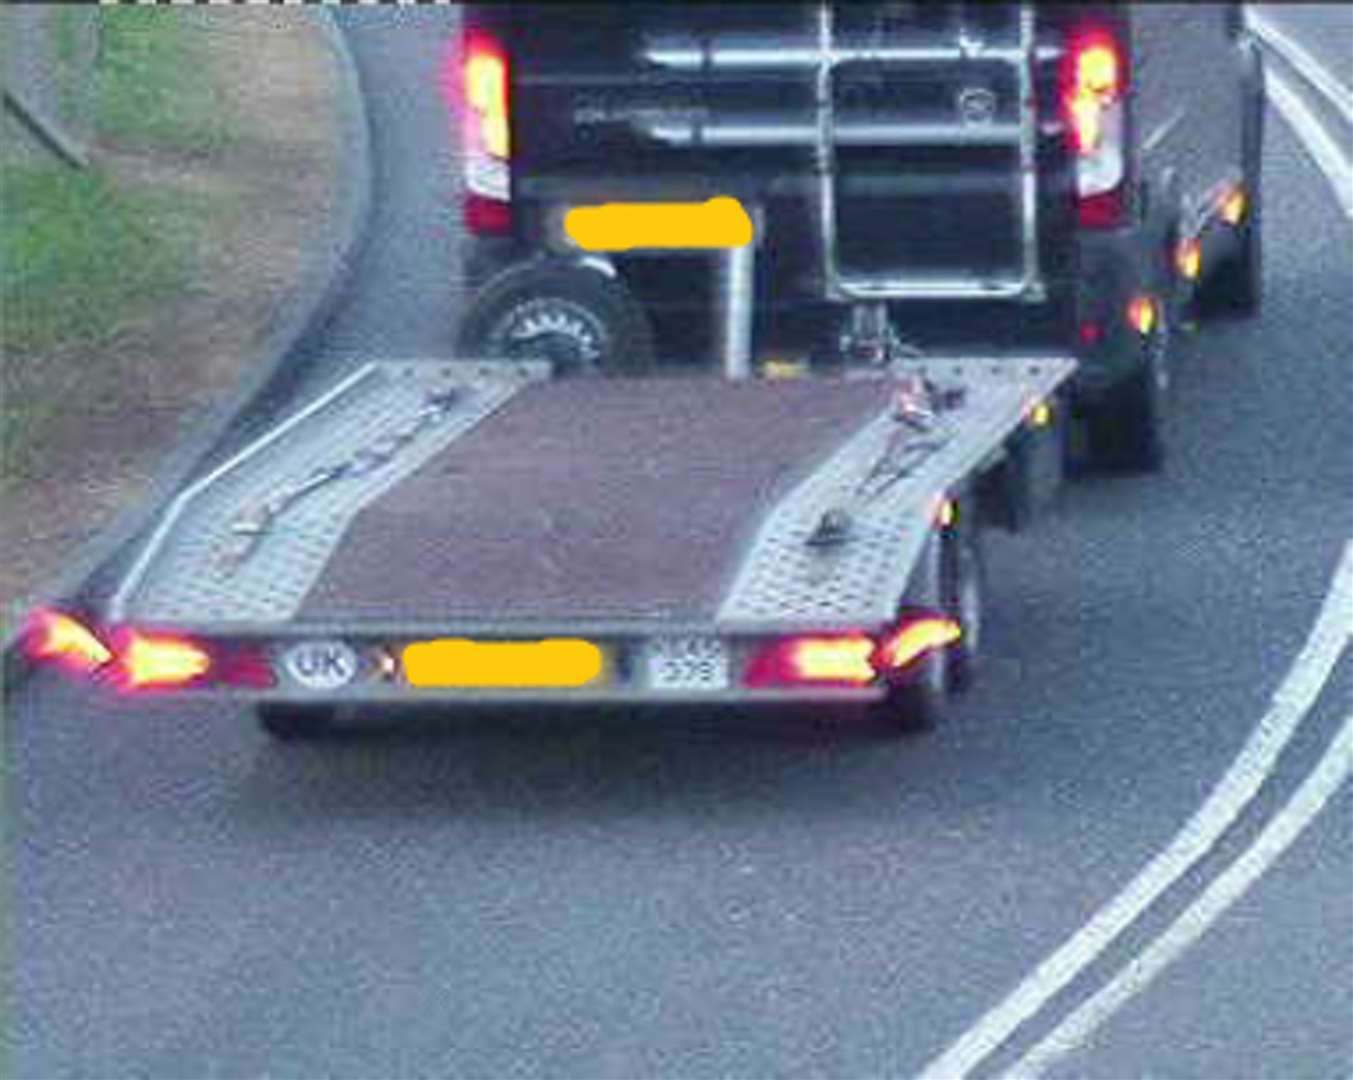 A specially adapted car pulling a trailer which had been converted to include a hide so drugs could be stored in it undetected (NWROCU)